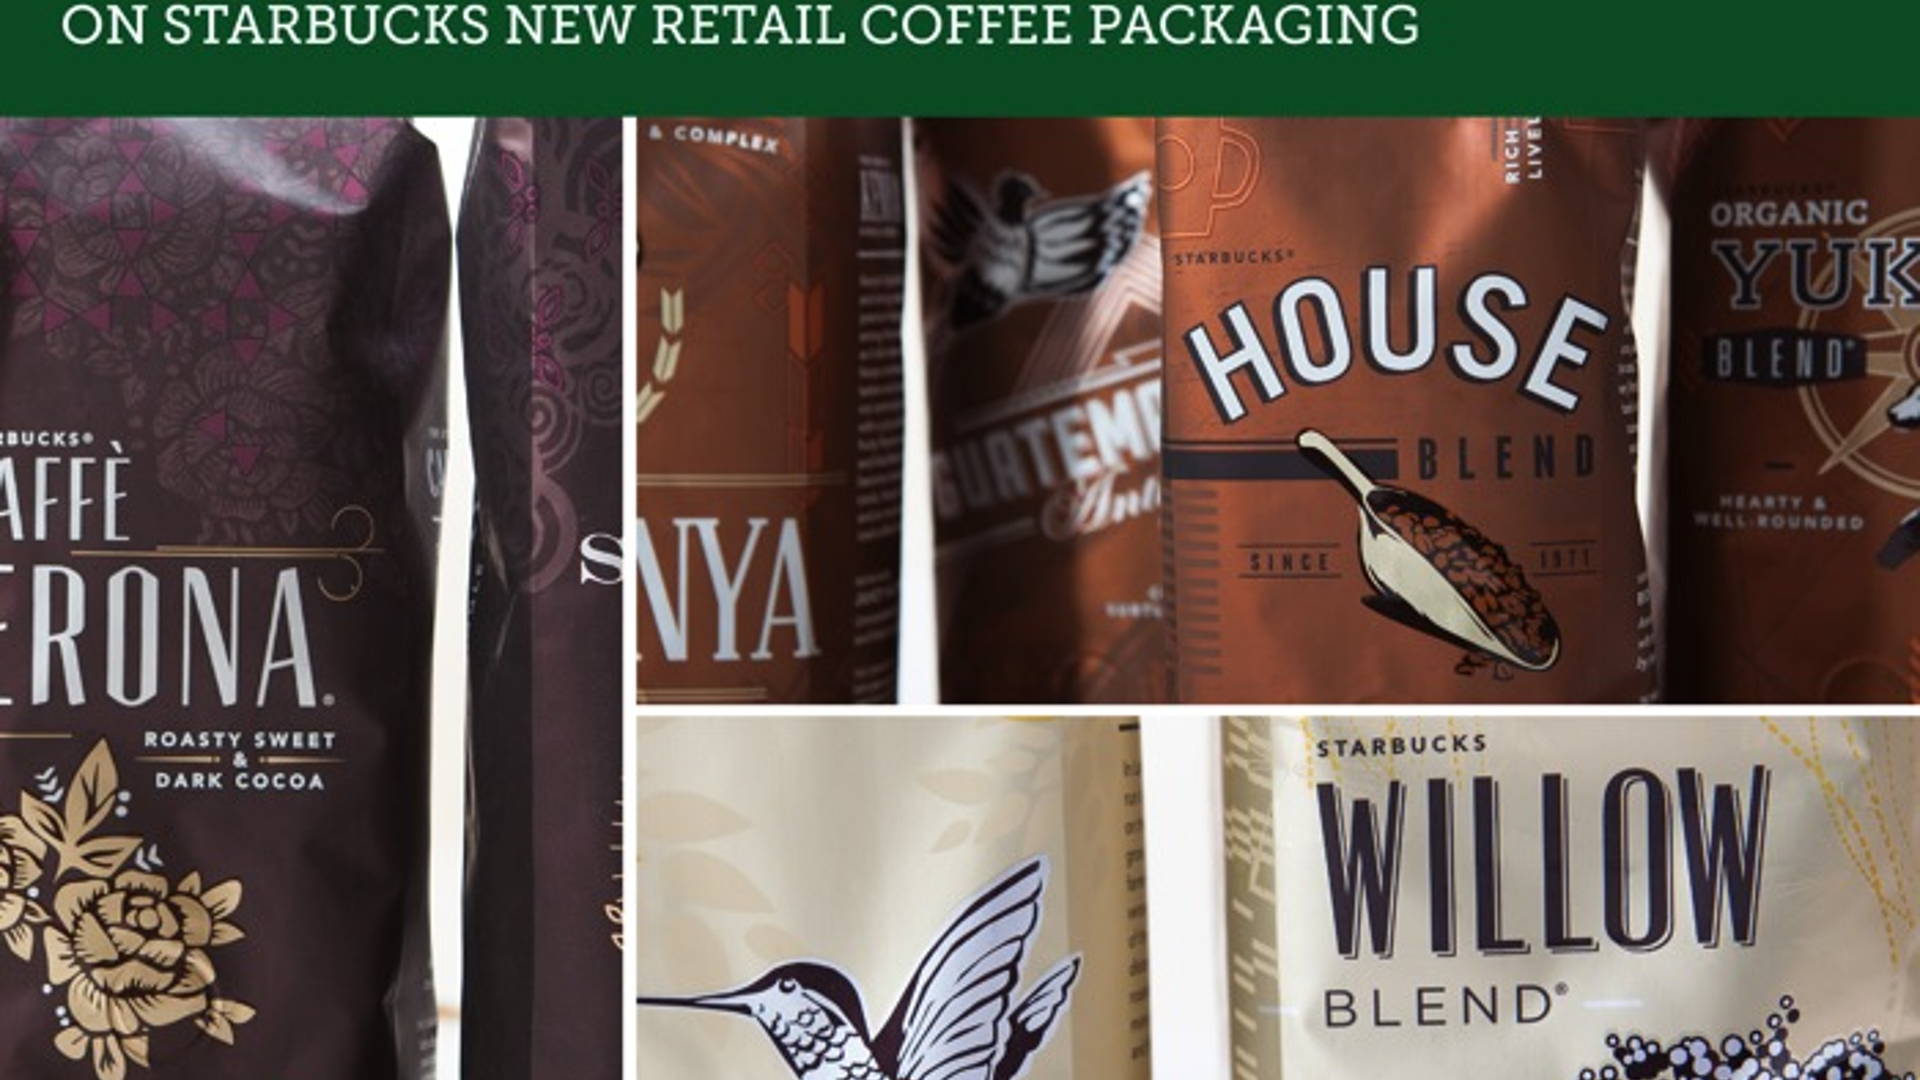 Featured image for Behind The Design: Interview with Mike Peck and Steve Murray on Starbucks New Retail Coffee Packaging